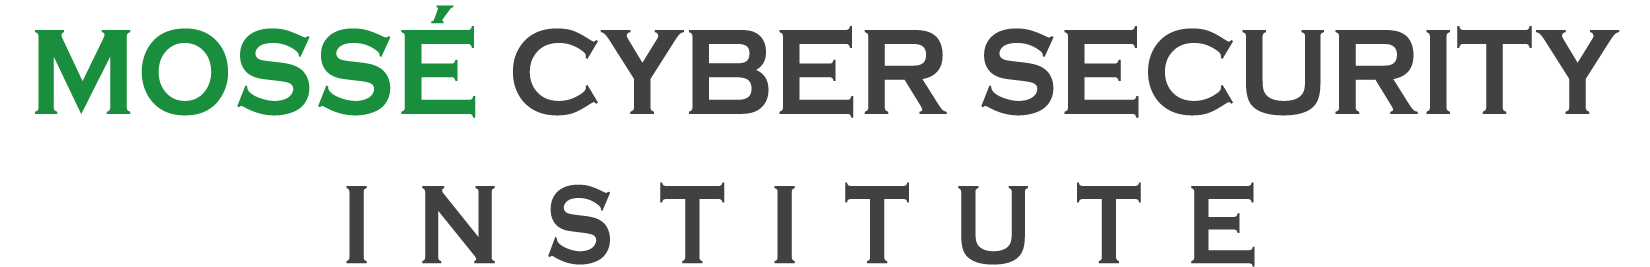 Mossé Cyber Security Institute logo with triangle